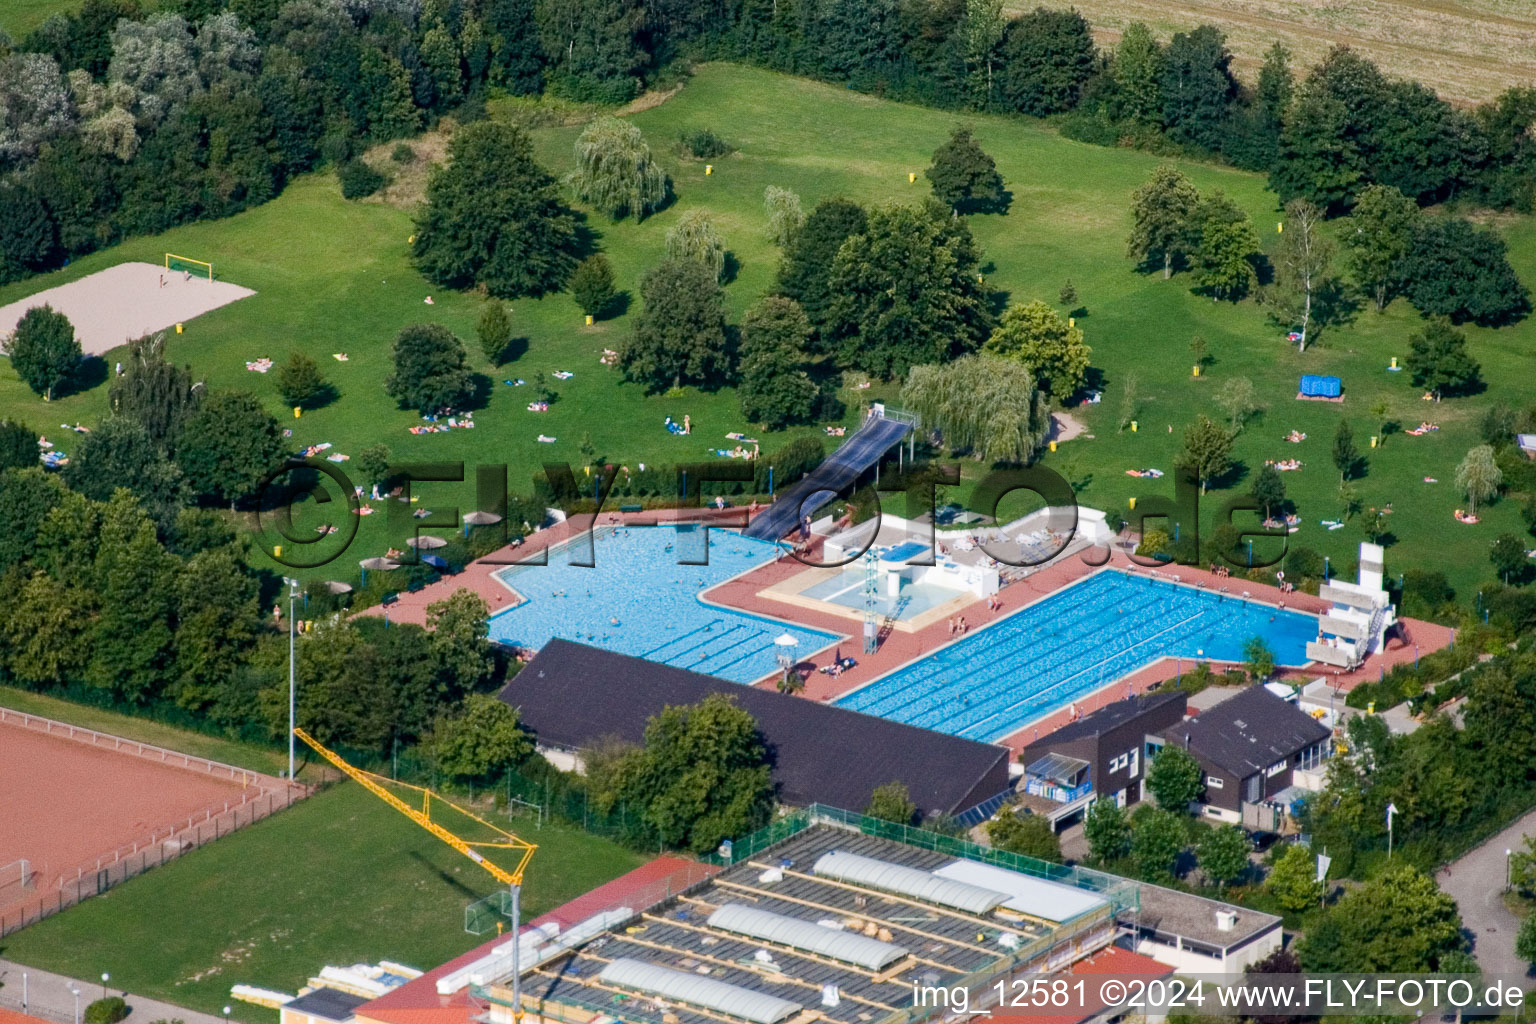 Outdoor pool in Offenbach an der Queich in the state Rhineland-Palatinate, Germany